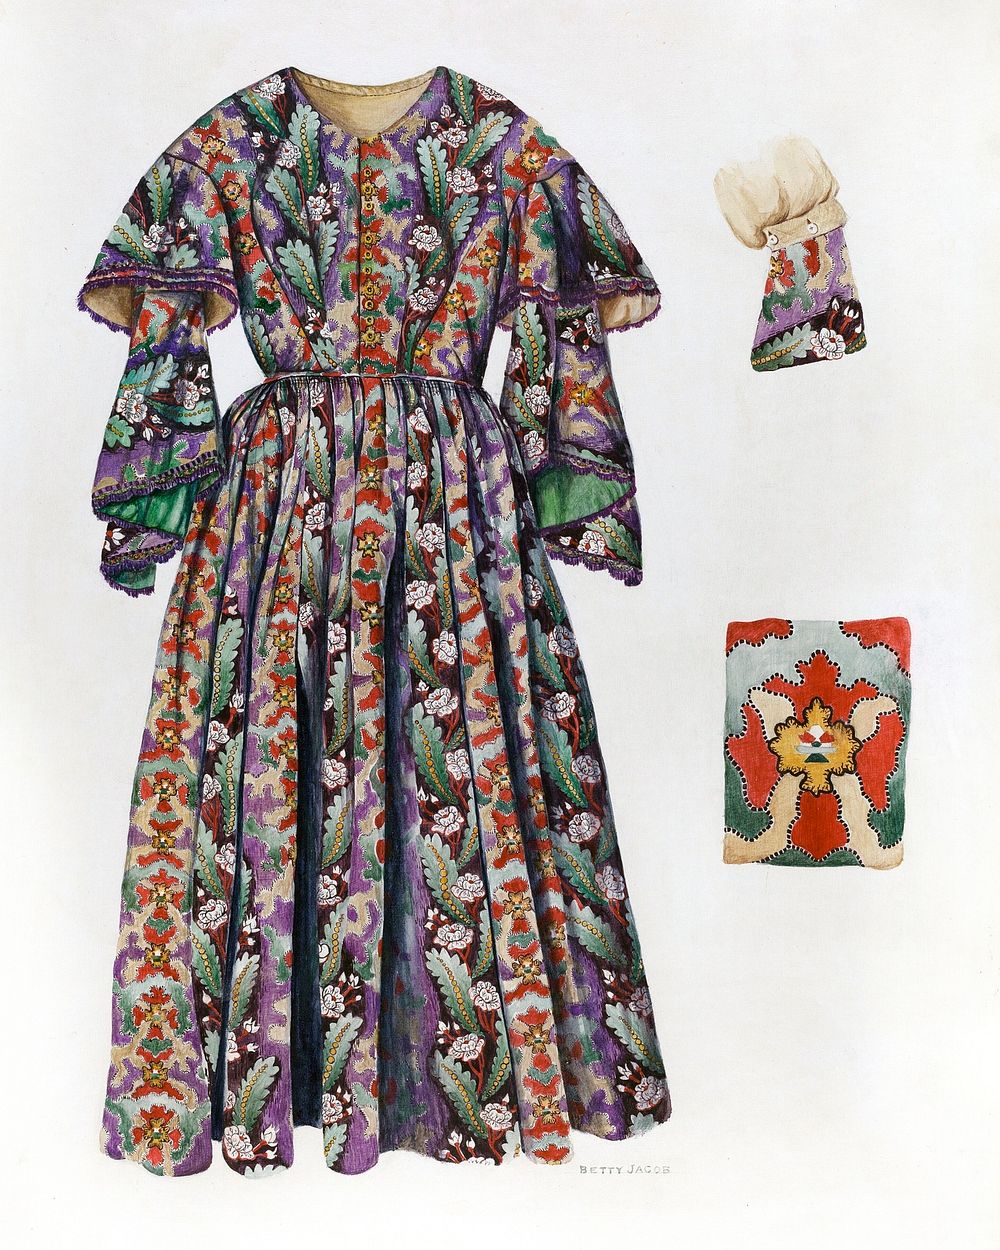 Pa. German Dress (1935&ndash;1942) by Betty Jacob. Original from The National Gallery of Art. Digitally enhanced by rawpixel.